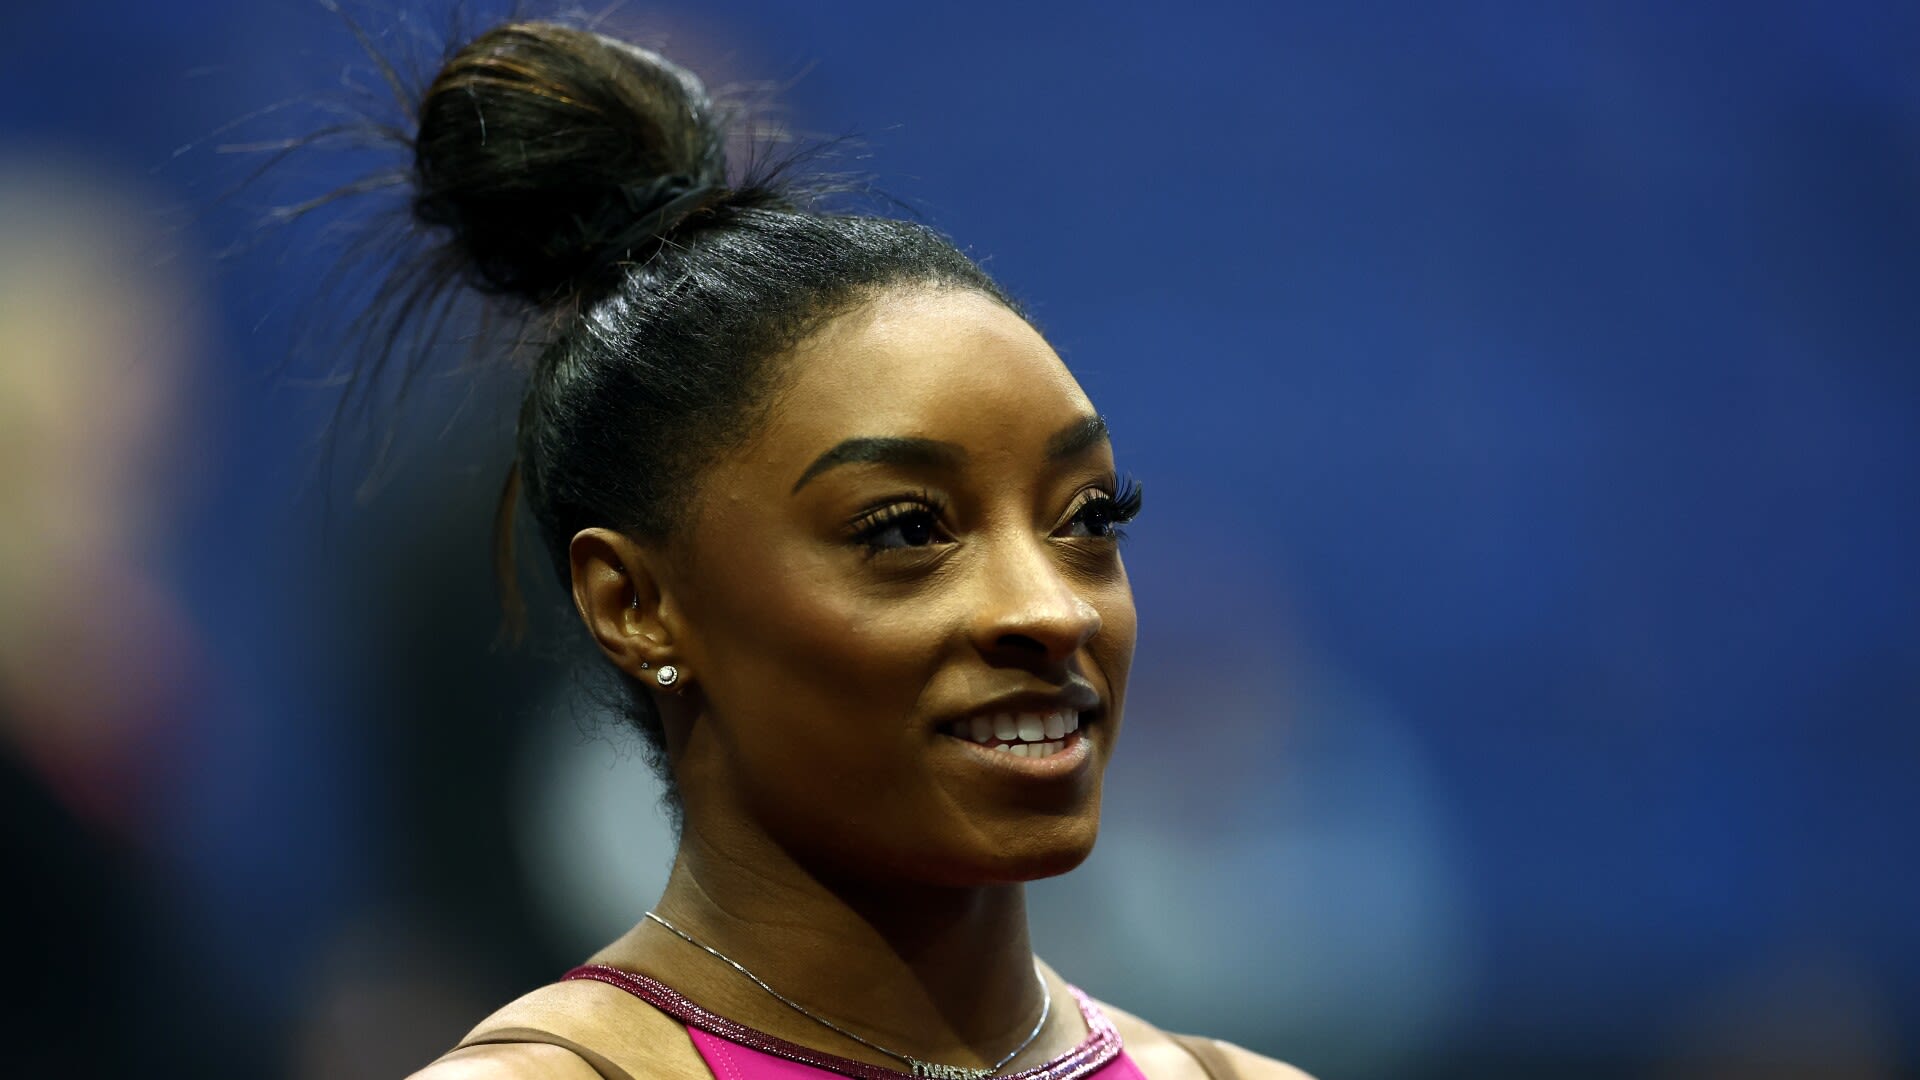 Simone Biles wins Core Hydration Classic in her first gymnastics meet of Olympic season